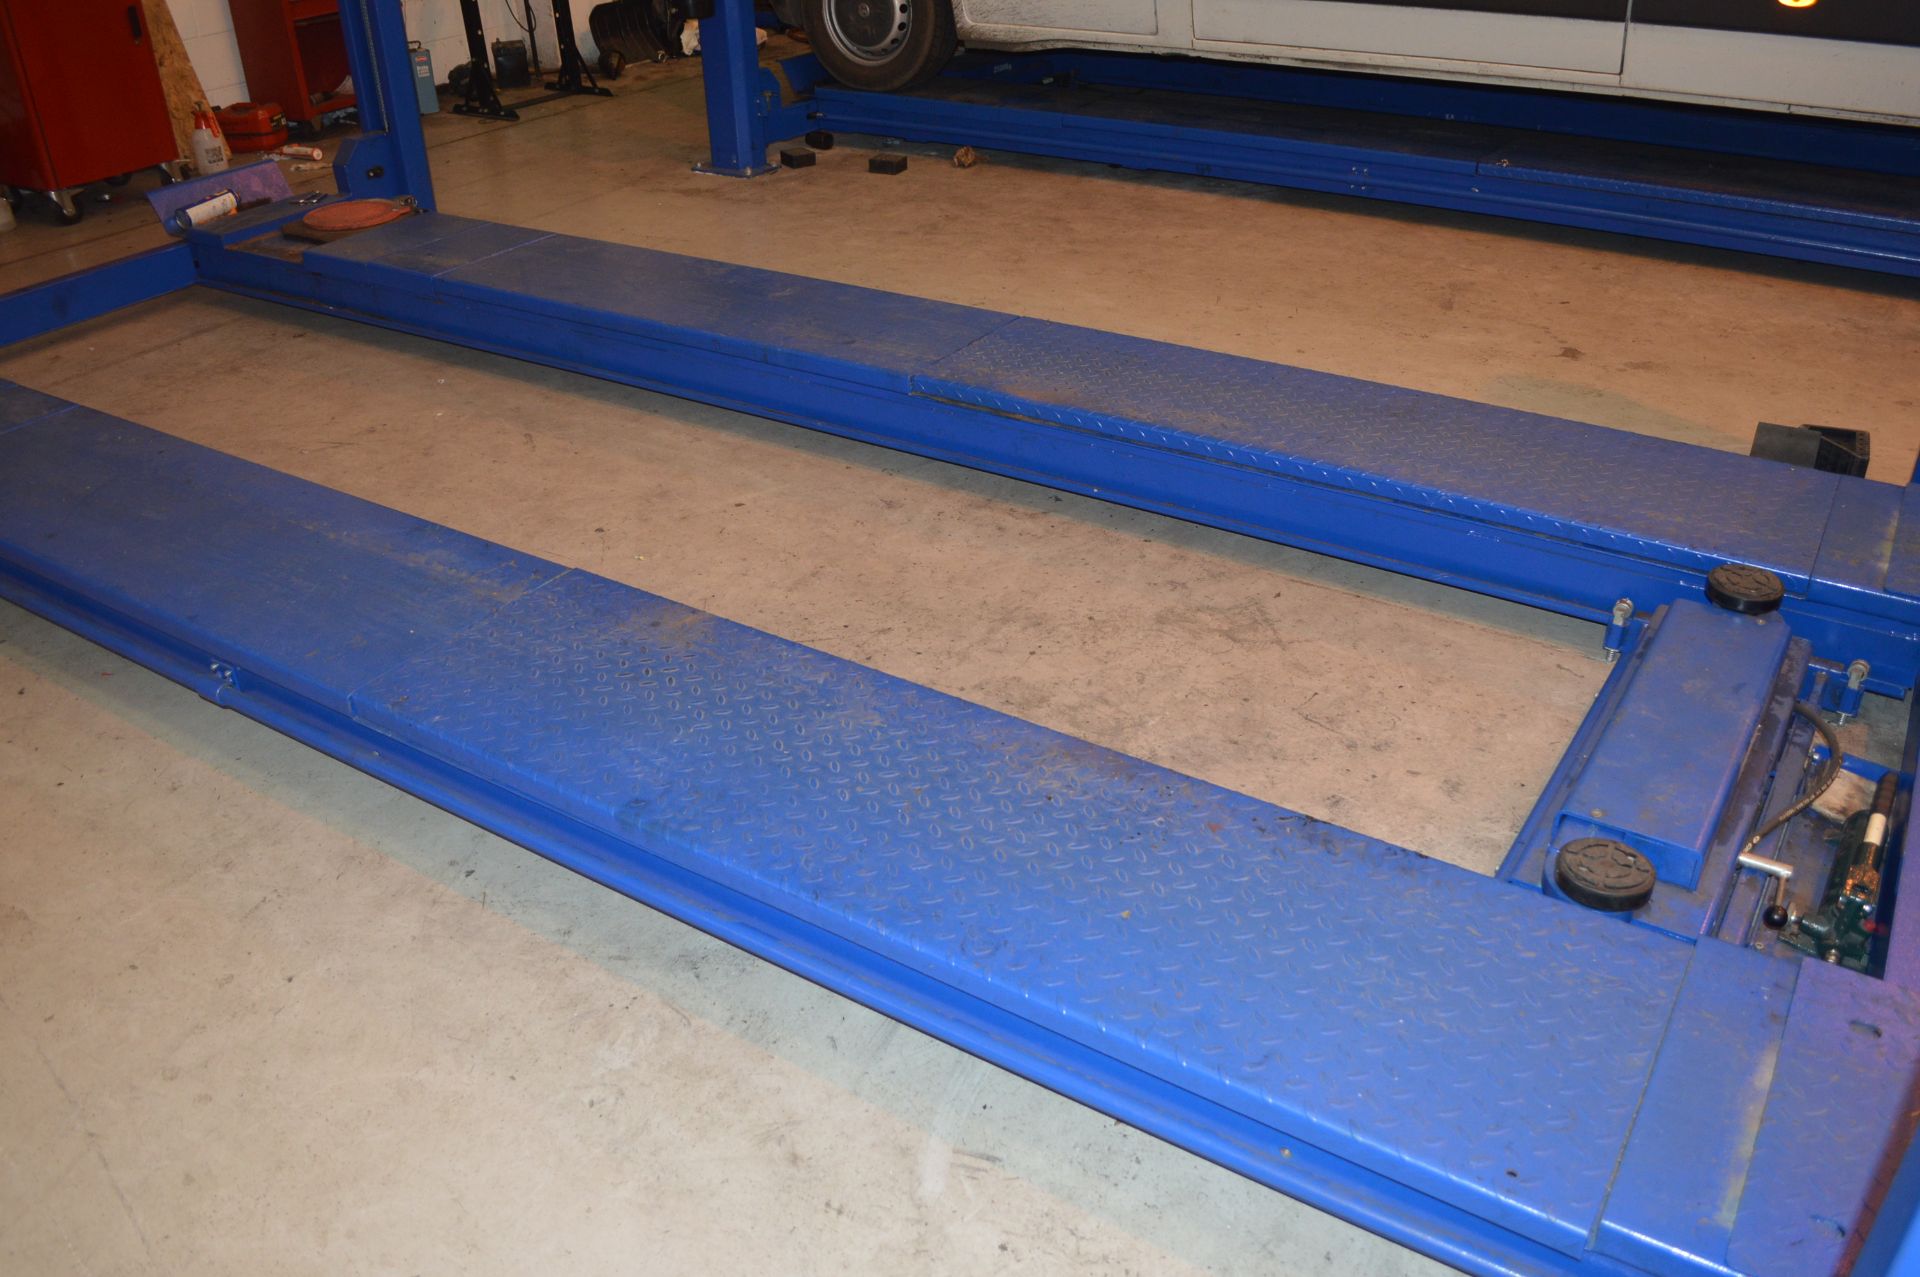 Automotech AS 6640 Four Poster Alignment Lift 4000kg Capacity with 2500kg Rolling Jack Beam & - Image 3 of 10